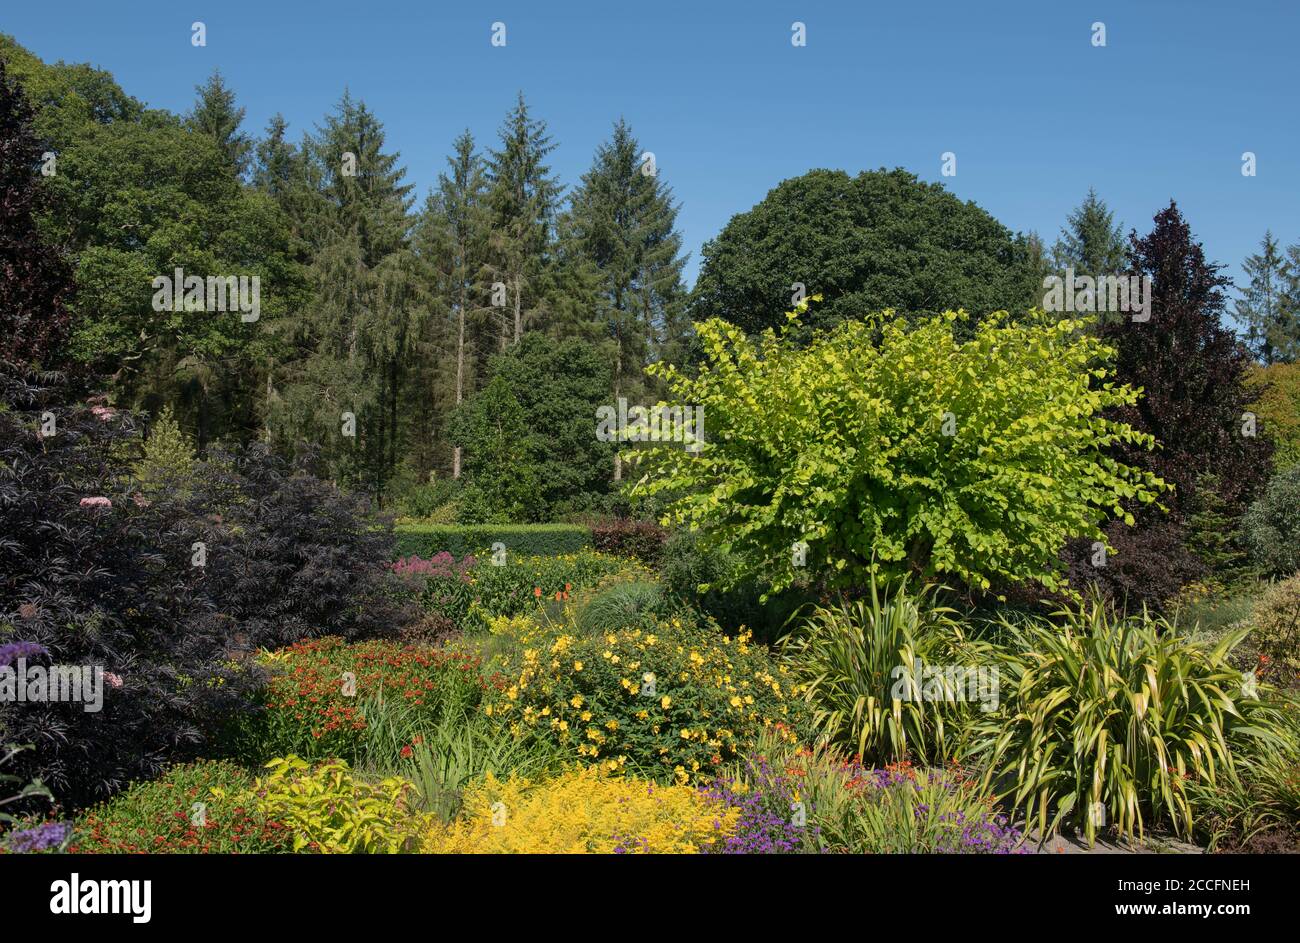 Traditional Summer Herbaceous Borders in the Hot Garden at Rosemoor with a Bright Blue Sky Background in Rural Devon, England, UK Stock Photo